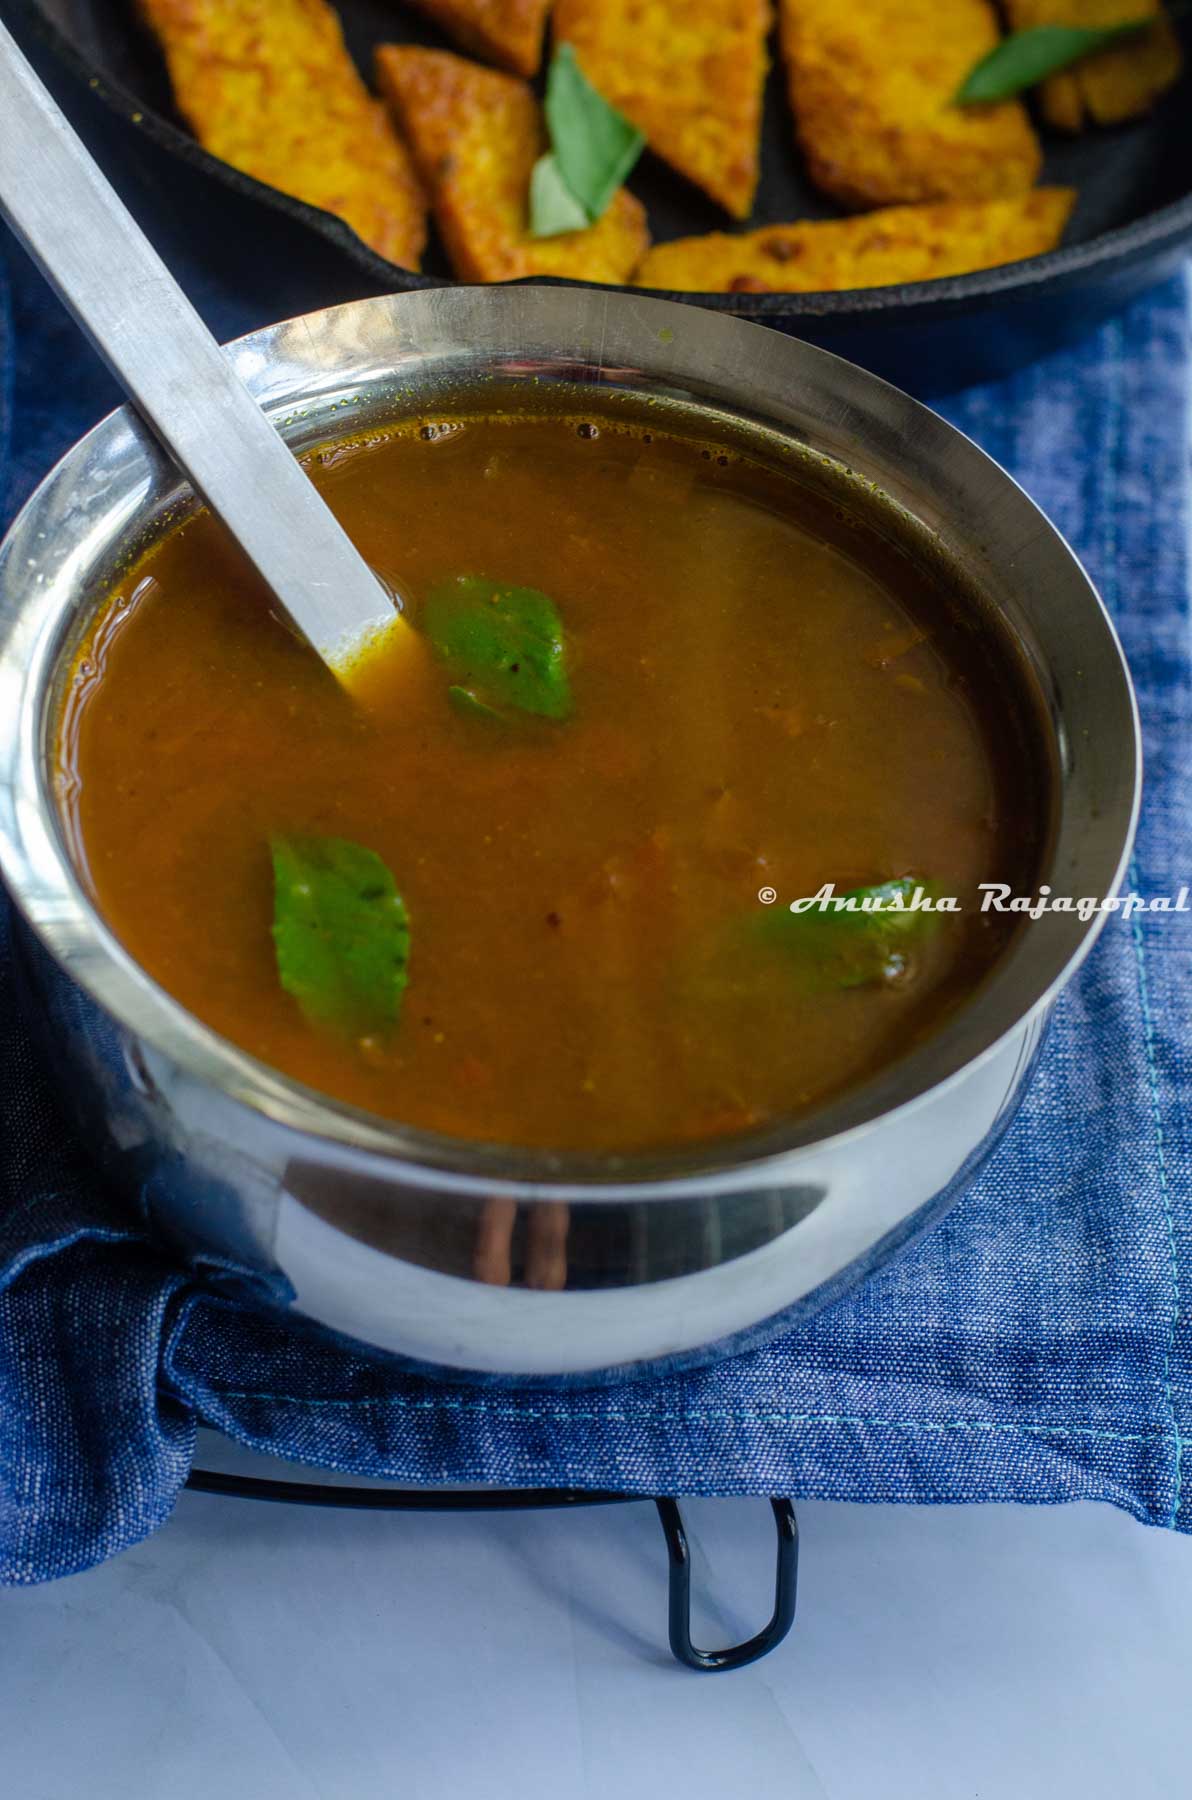 South Indian Tomato Rasam served in a steel bowl. A ladle is in the bowl.